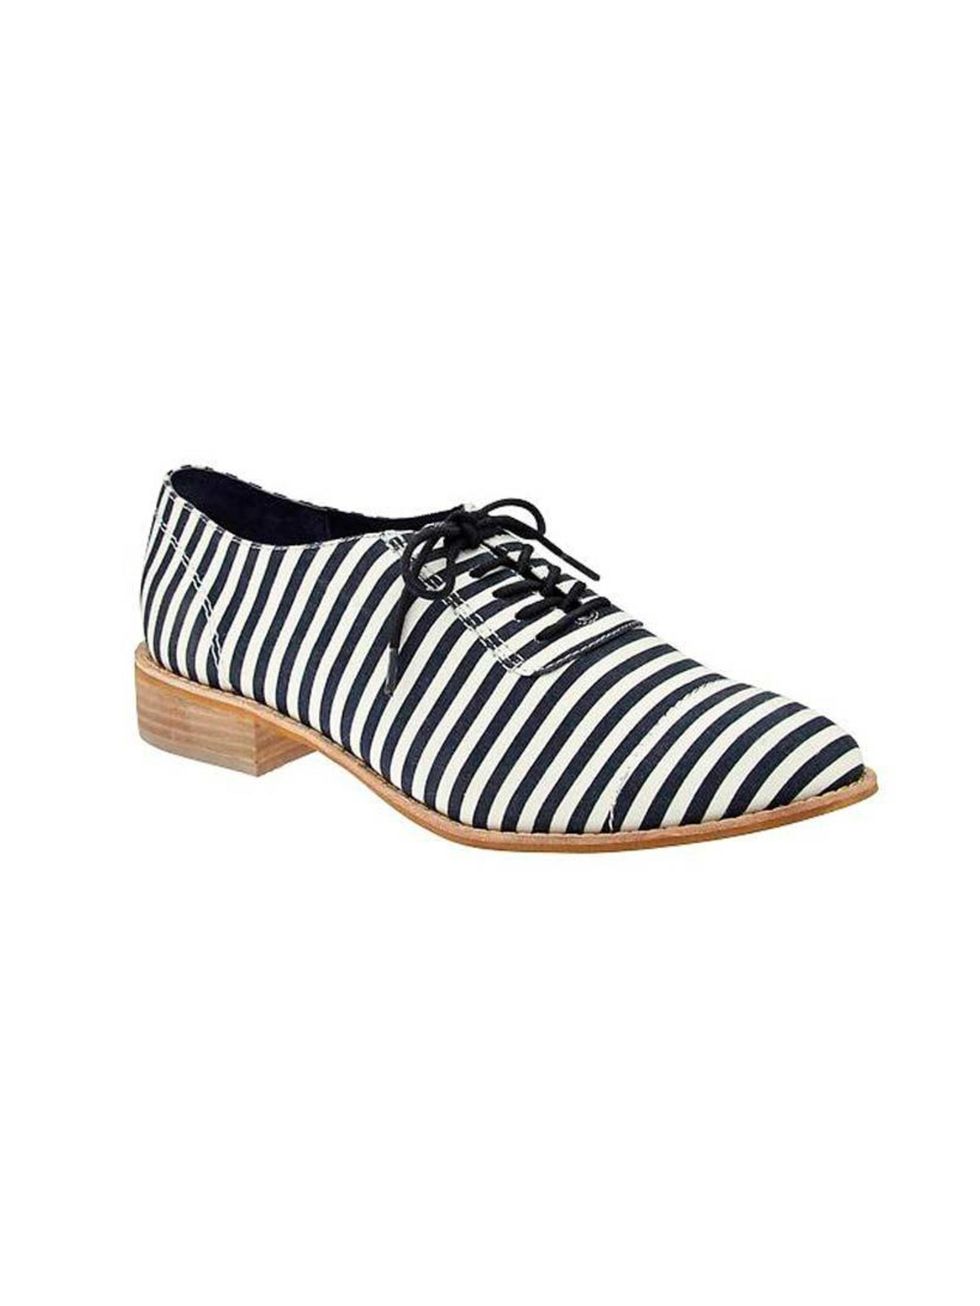 <p>Cool stripes for the feet </p><p>Stripe shoes £45 from <a href="http://www.gap.co.uk/browse/product.do?pid=000942358001&amp;preferredLocale=en_GB&amp;kwid=1&amp;sem=false&amp;vid=0&amp;sdReferer=http%3A%2F%2Fwww.gap.co.uk%2Fproducts%2Fwomens-shoes.jsp"